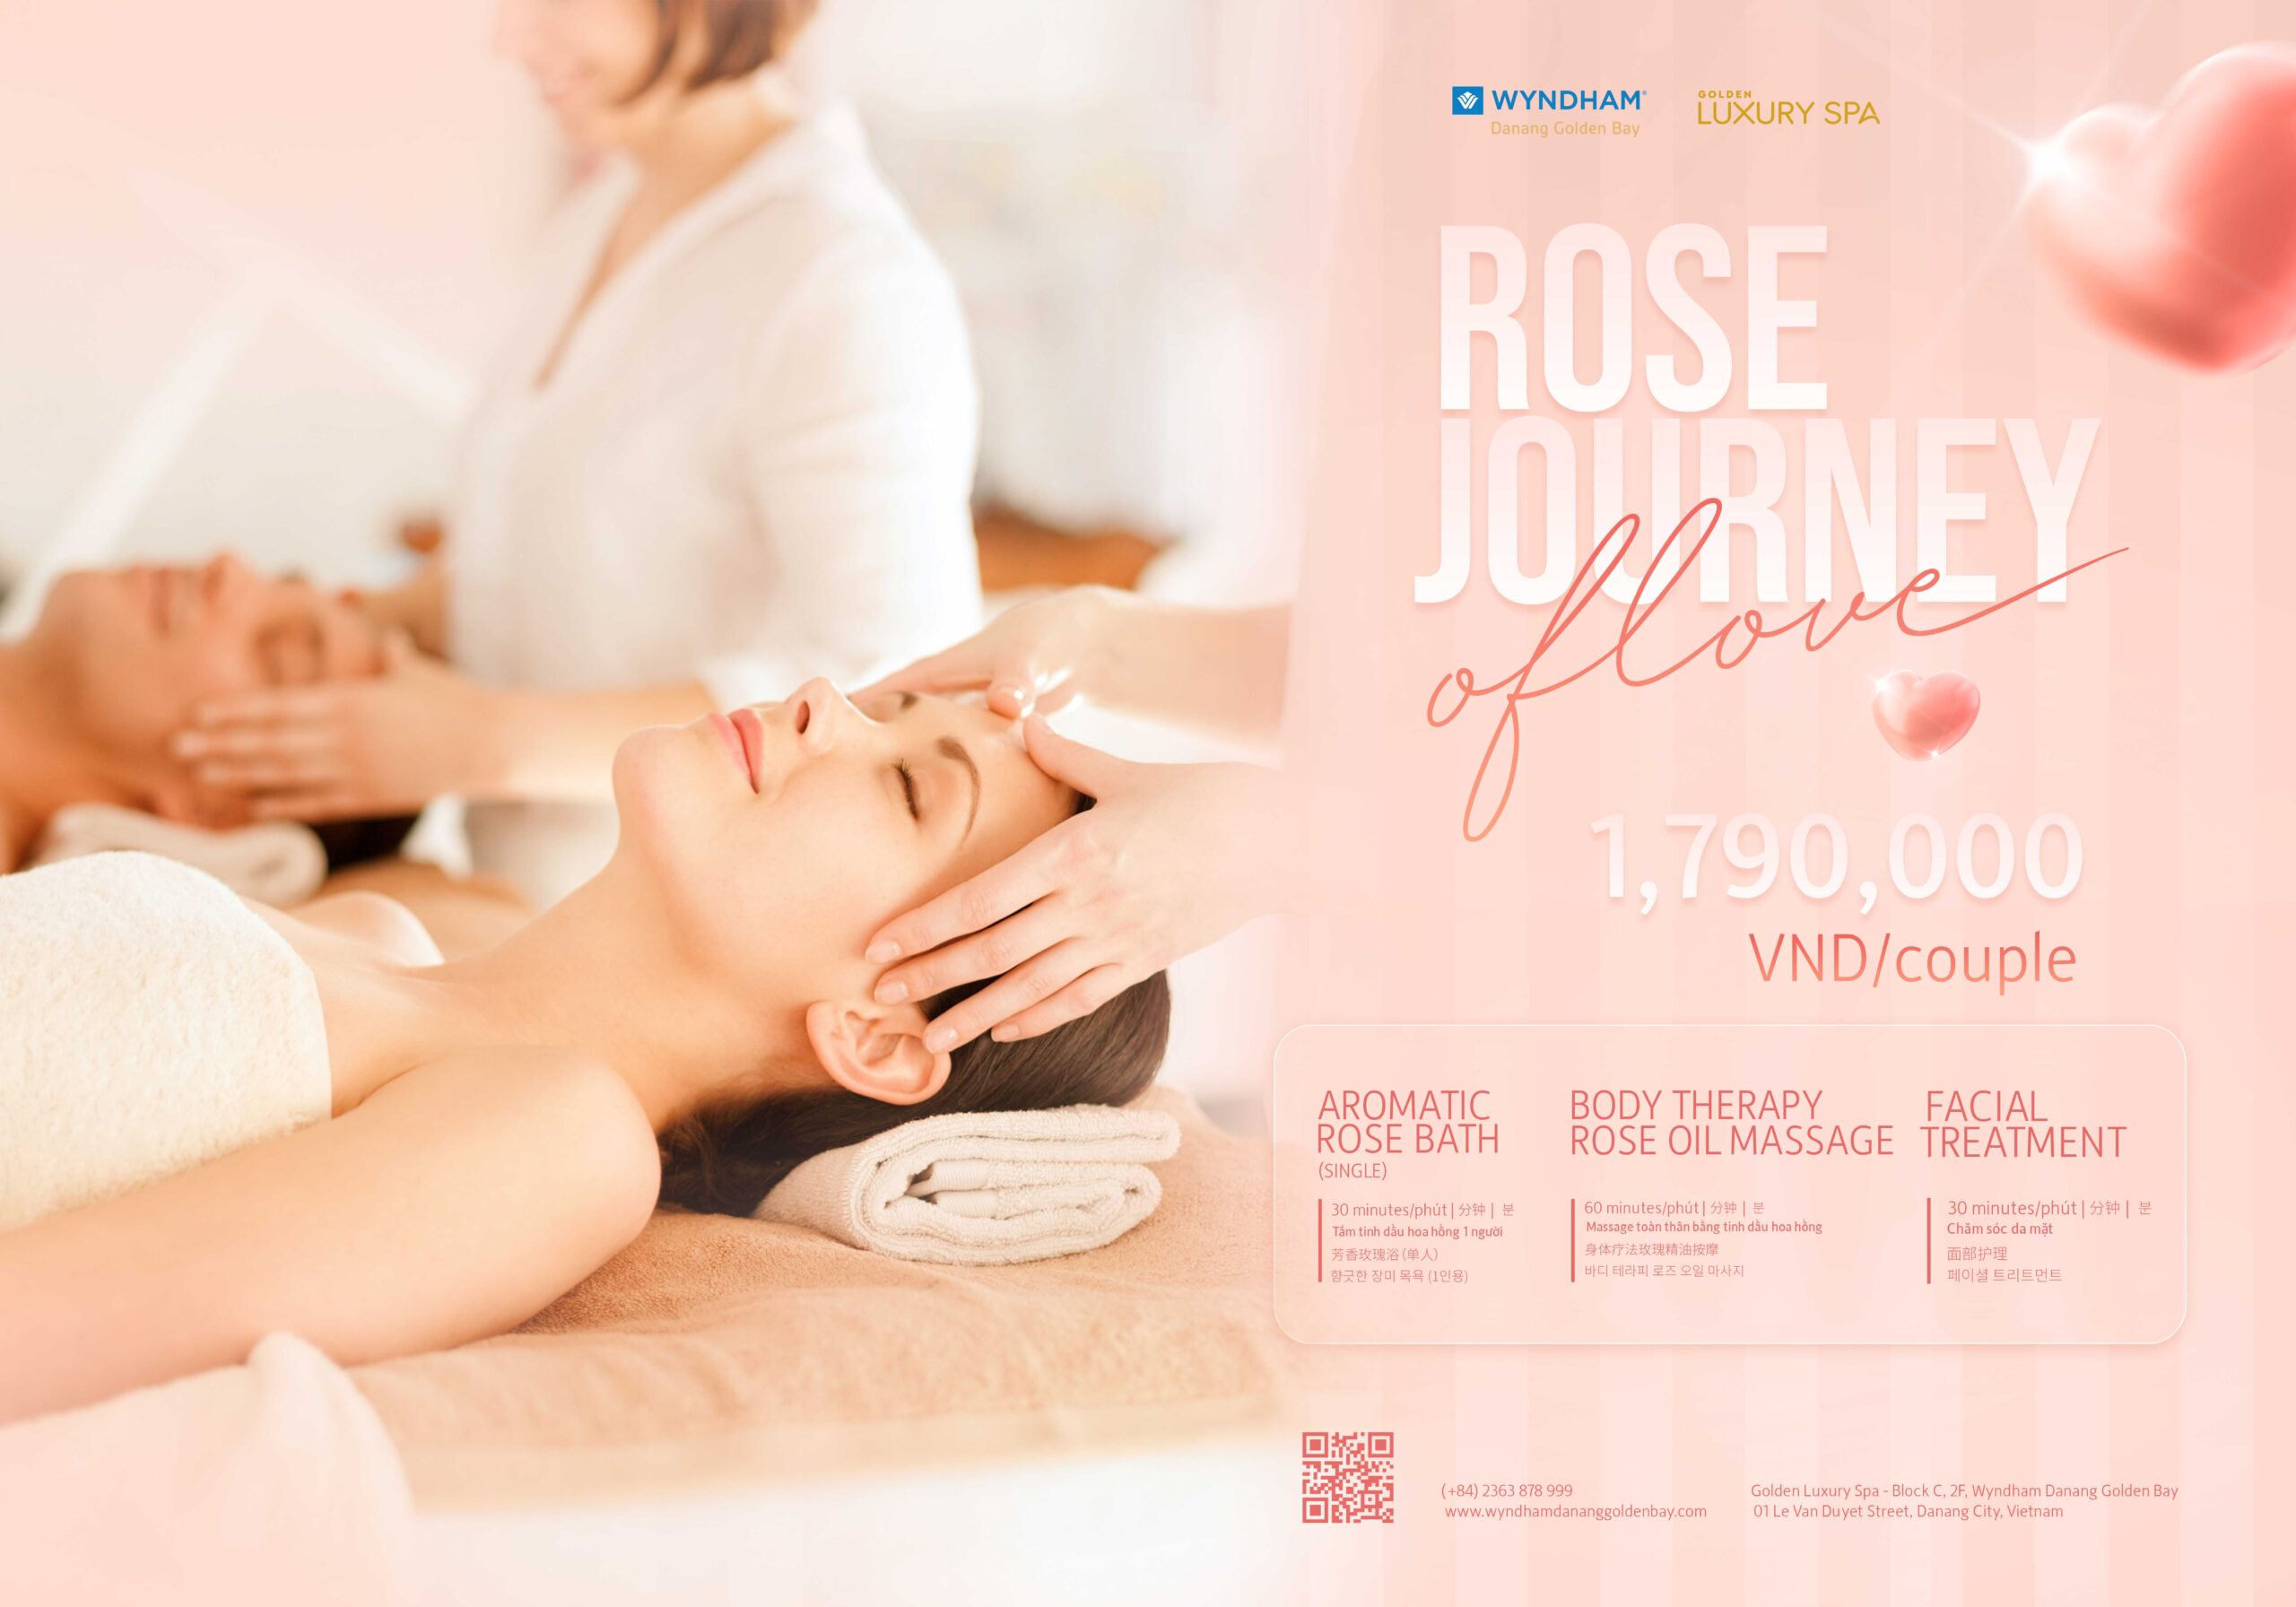 Rose Journey of love package